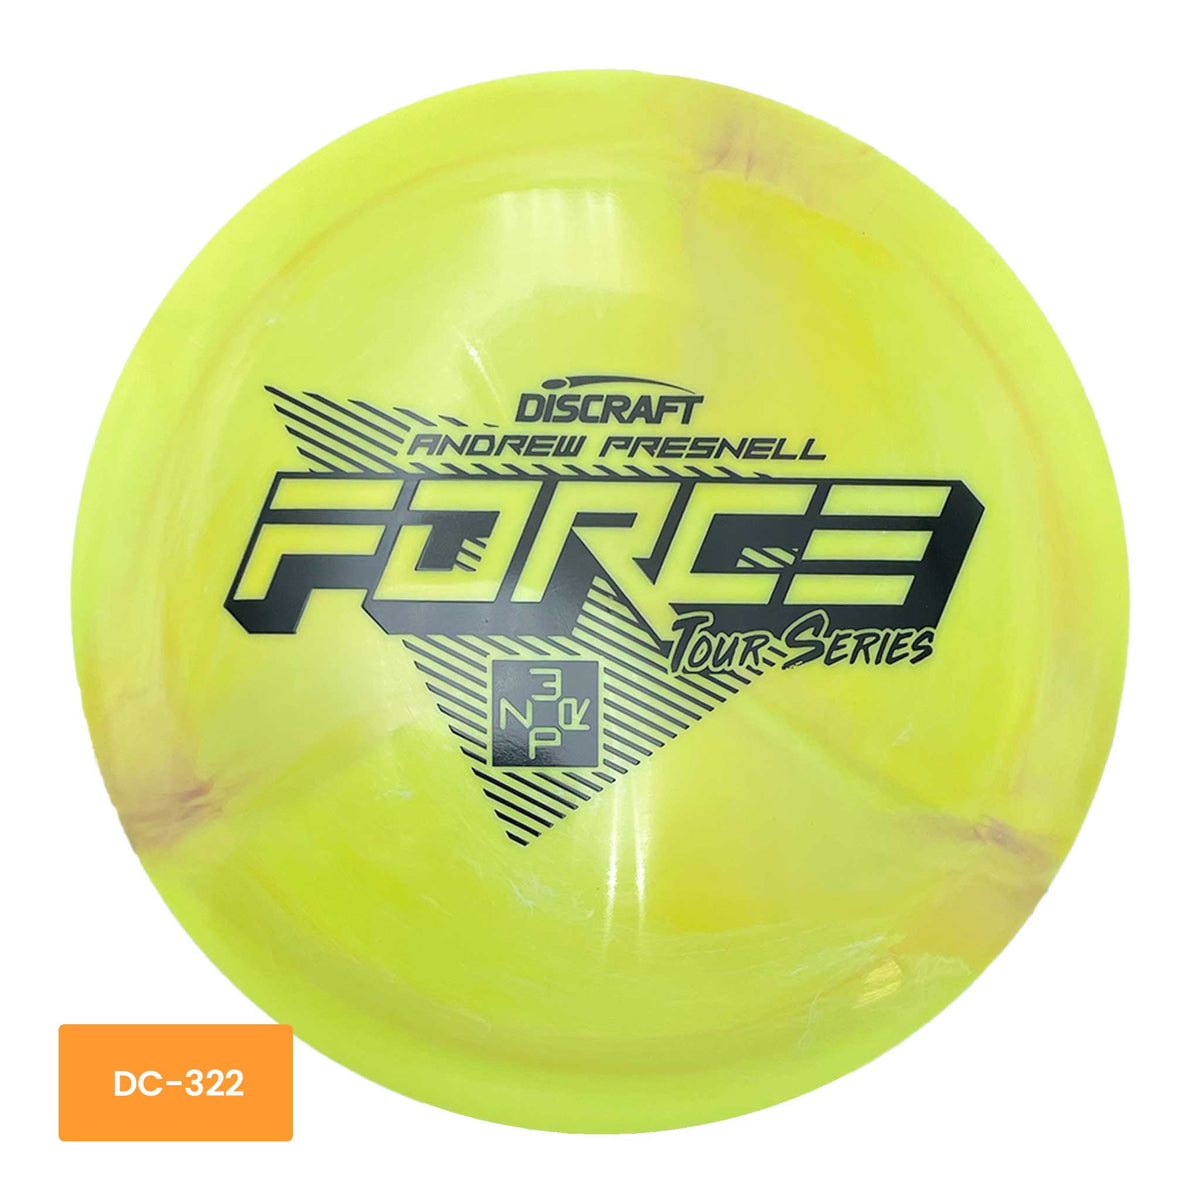 Discraft 2022 Andrew Presnell Tour Series Force distance driver - Yellow